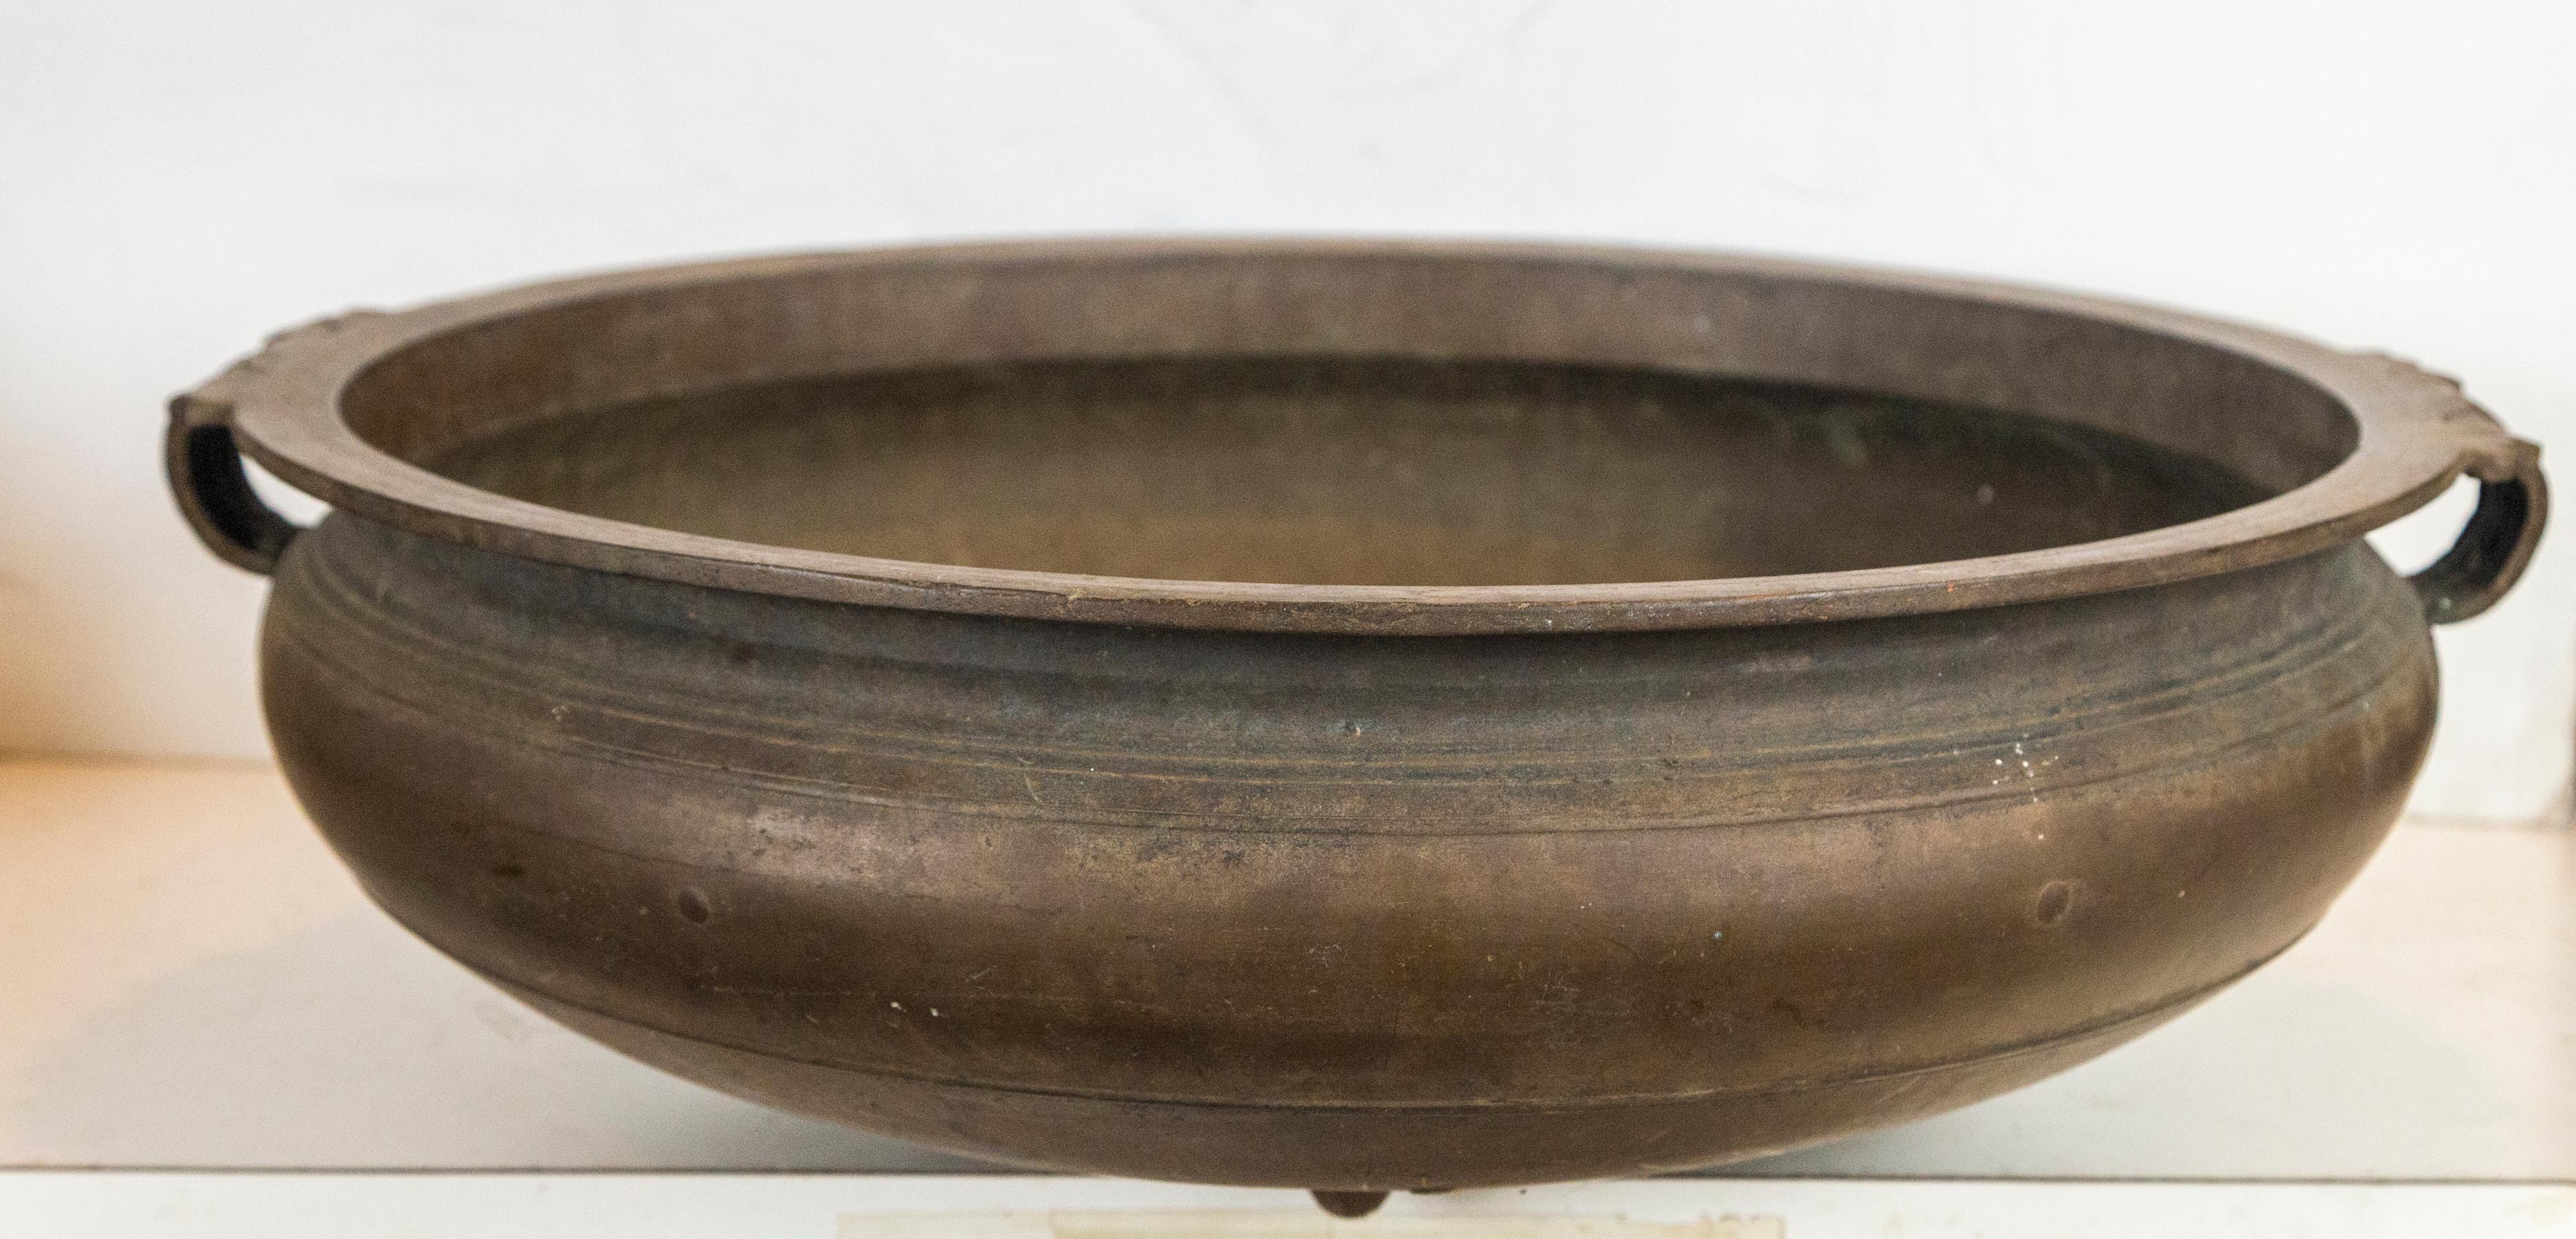 Indian cast bronze urli of shallow circular form. Probably cast using the lost wax technique, These urlis were a traditional container used for serving food in temples and other holy sites. Scrolling handles from the rim, above a decorative element.